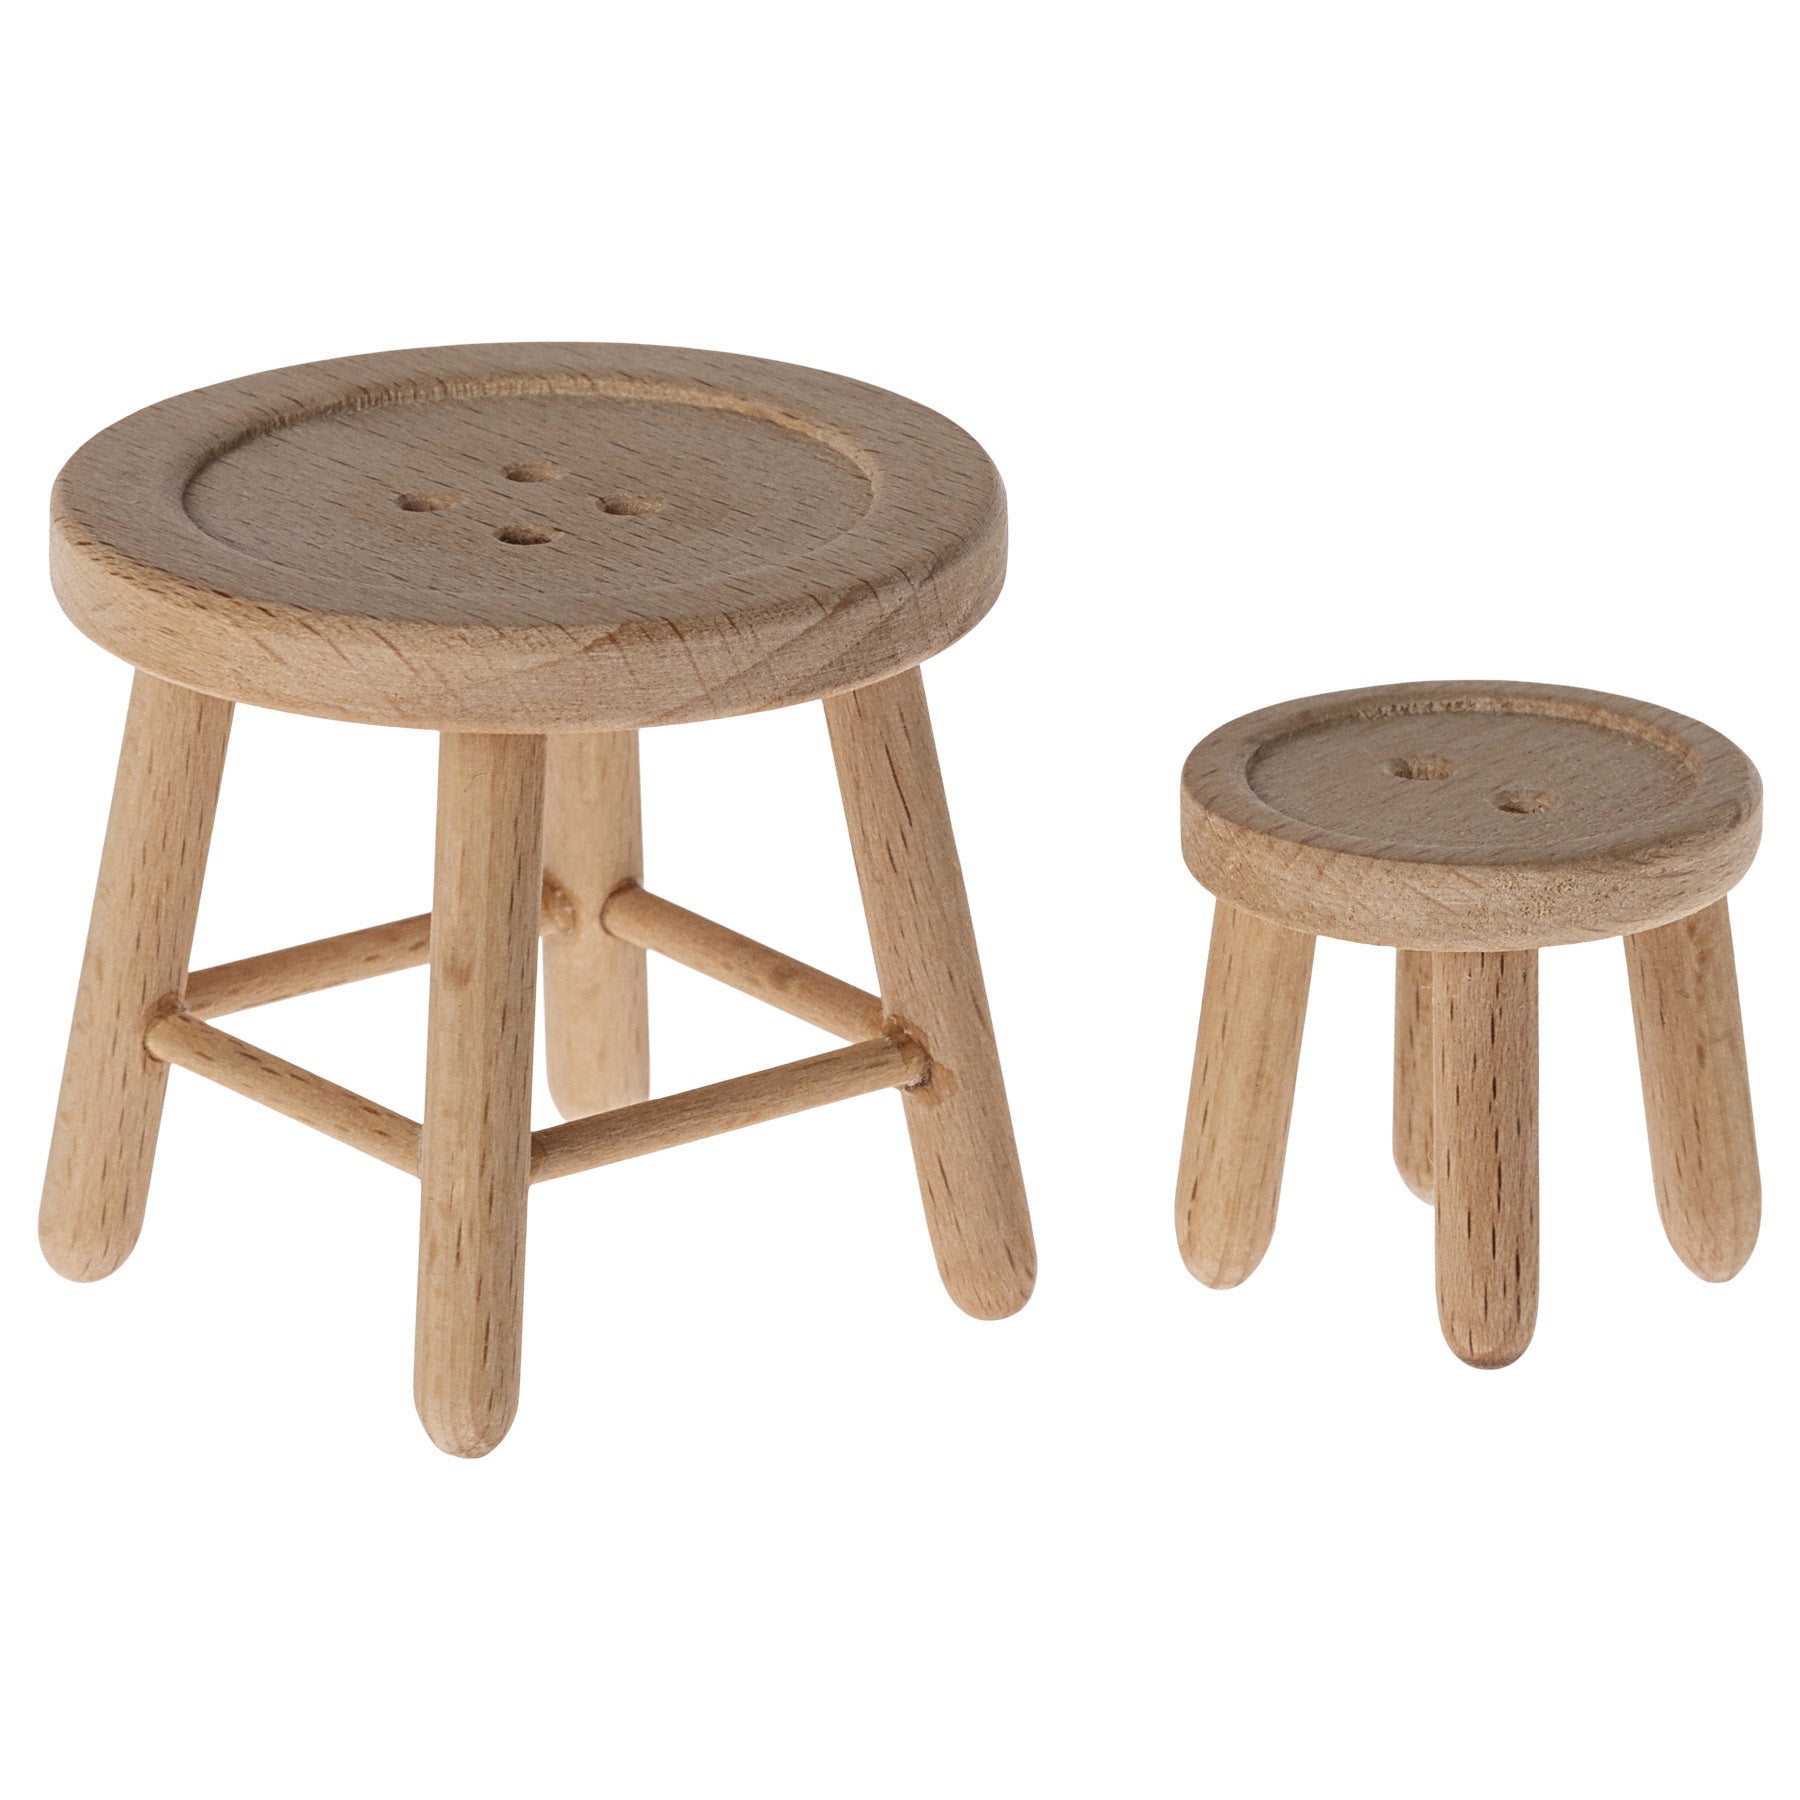 maileg wooden stool and table, the table and stool top look like wooden buttons